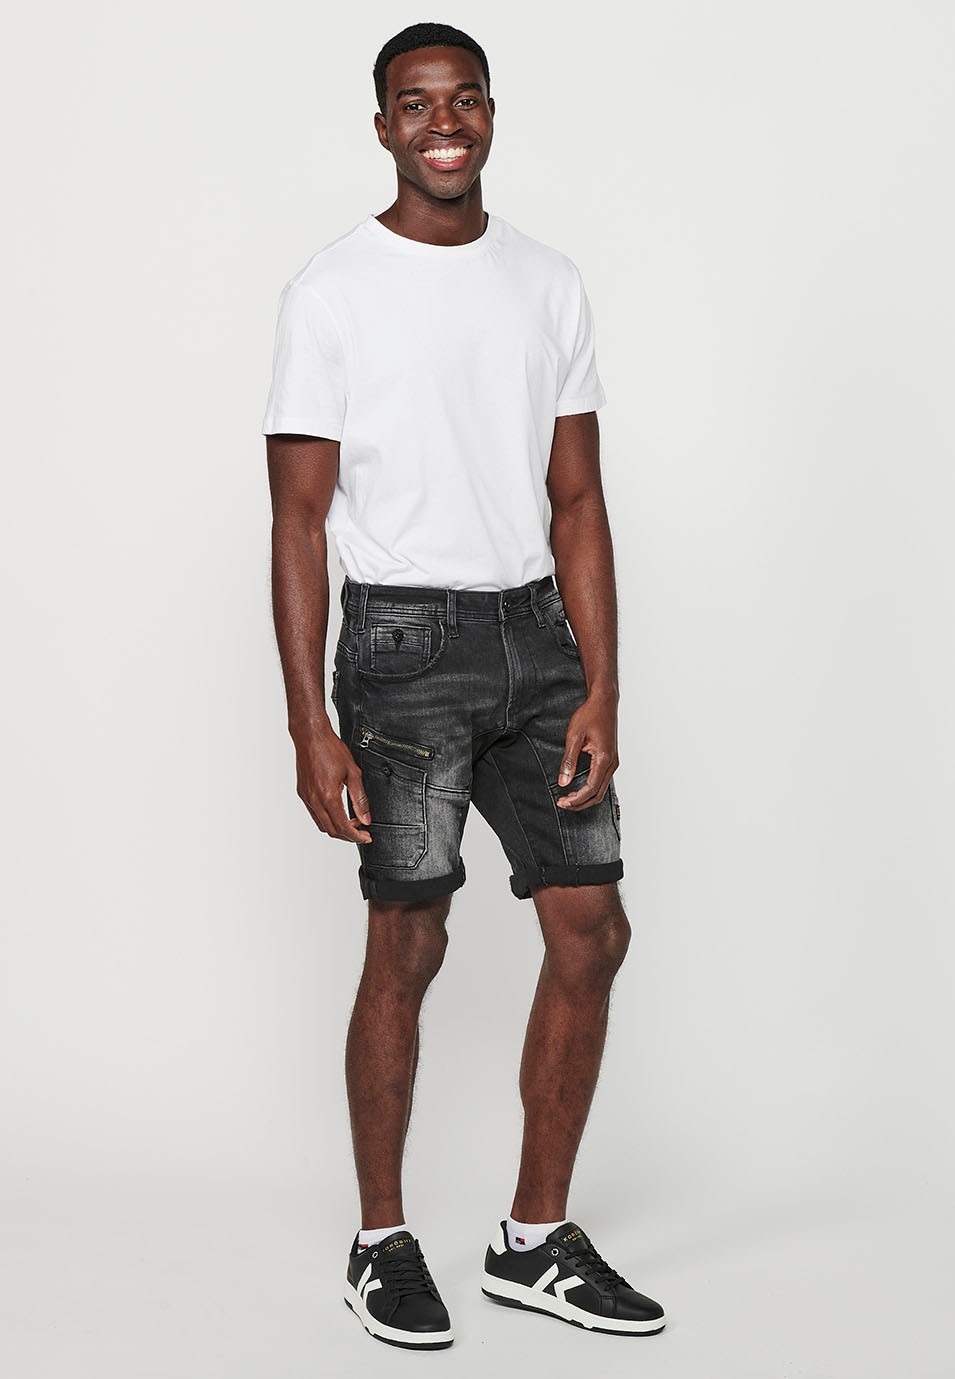 Shorts with Turn-up Finish and Front Closure with Zipper and Button with Five Pockets, One Pocket Pocket and Front Details in Black for Men